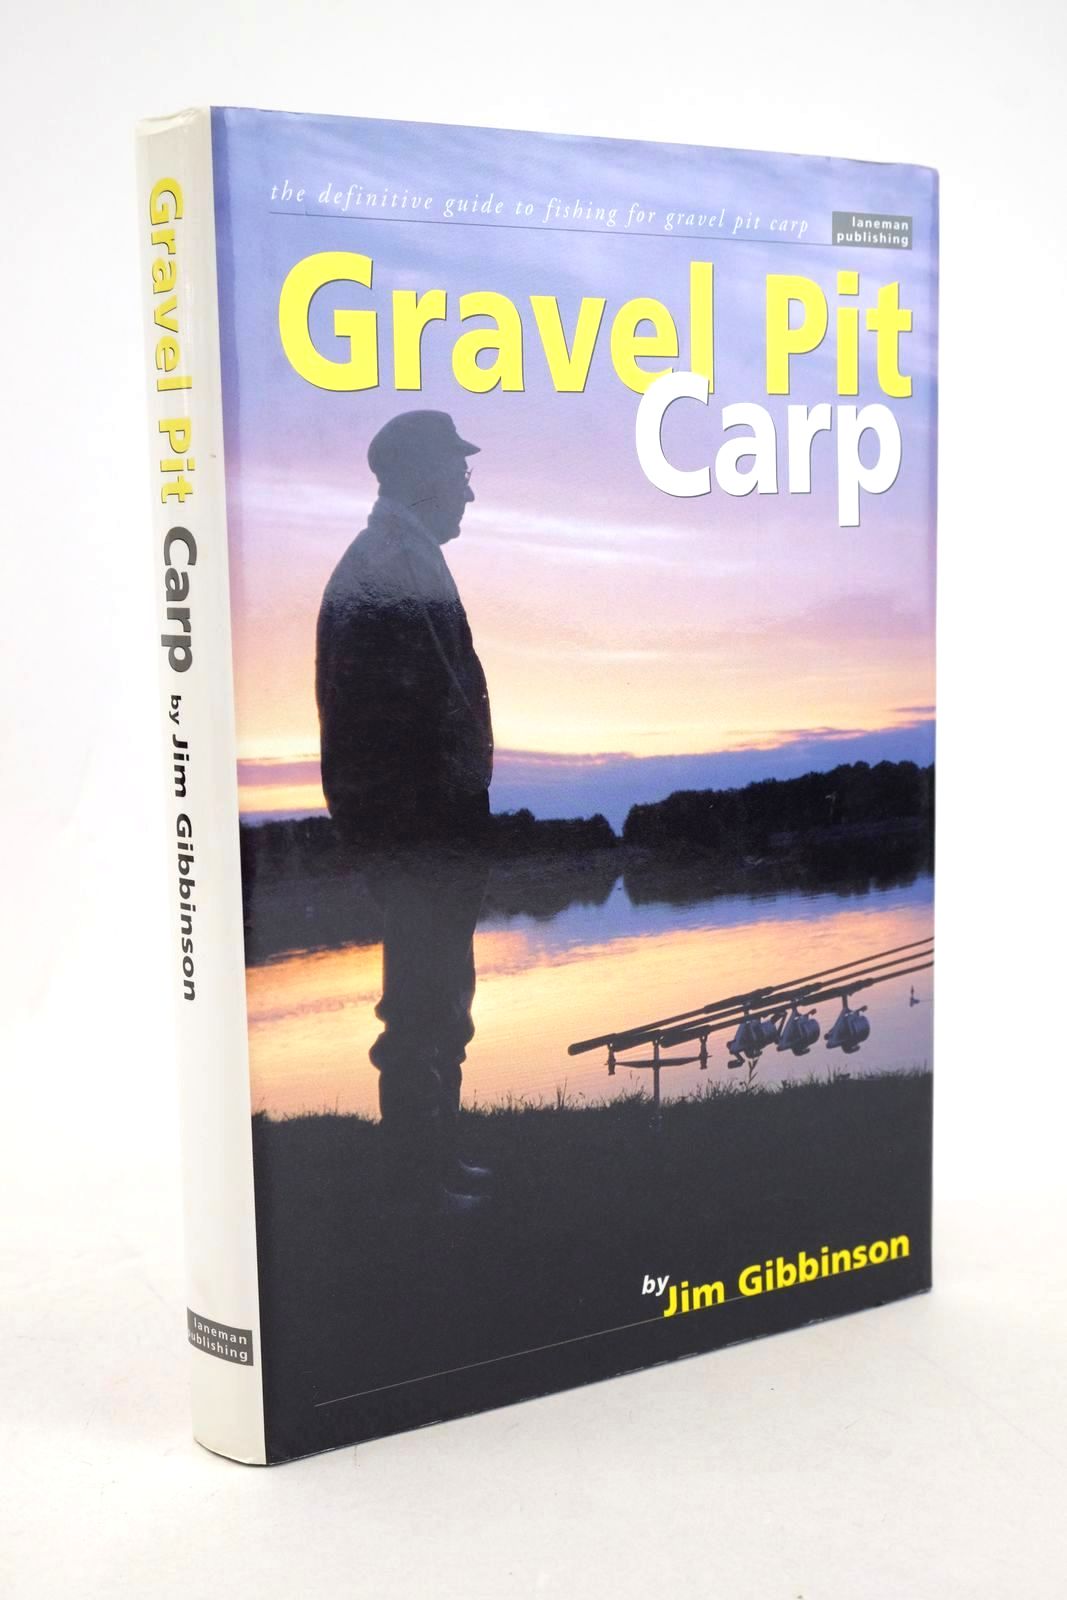 Photo of GRAVEL PIT CARP written by Gibbinson, Jim published by Laneman Publishing (STOCK CODE: 1327659)  for sale by Stella & Rose's Books